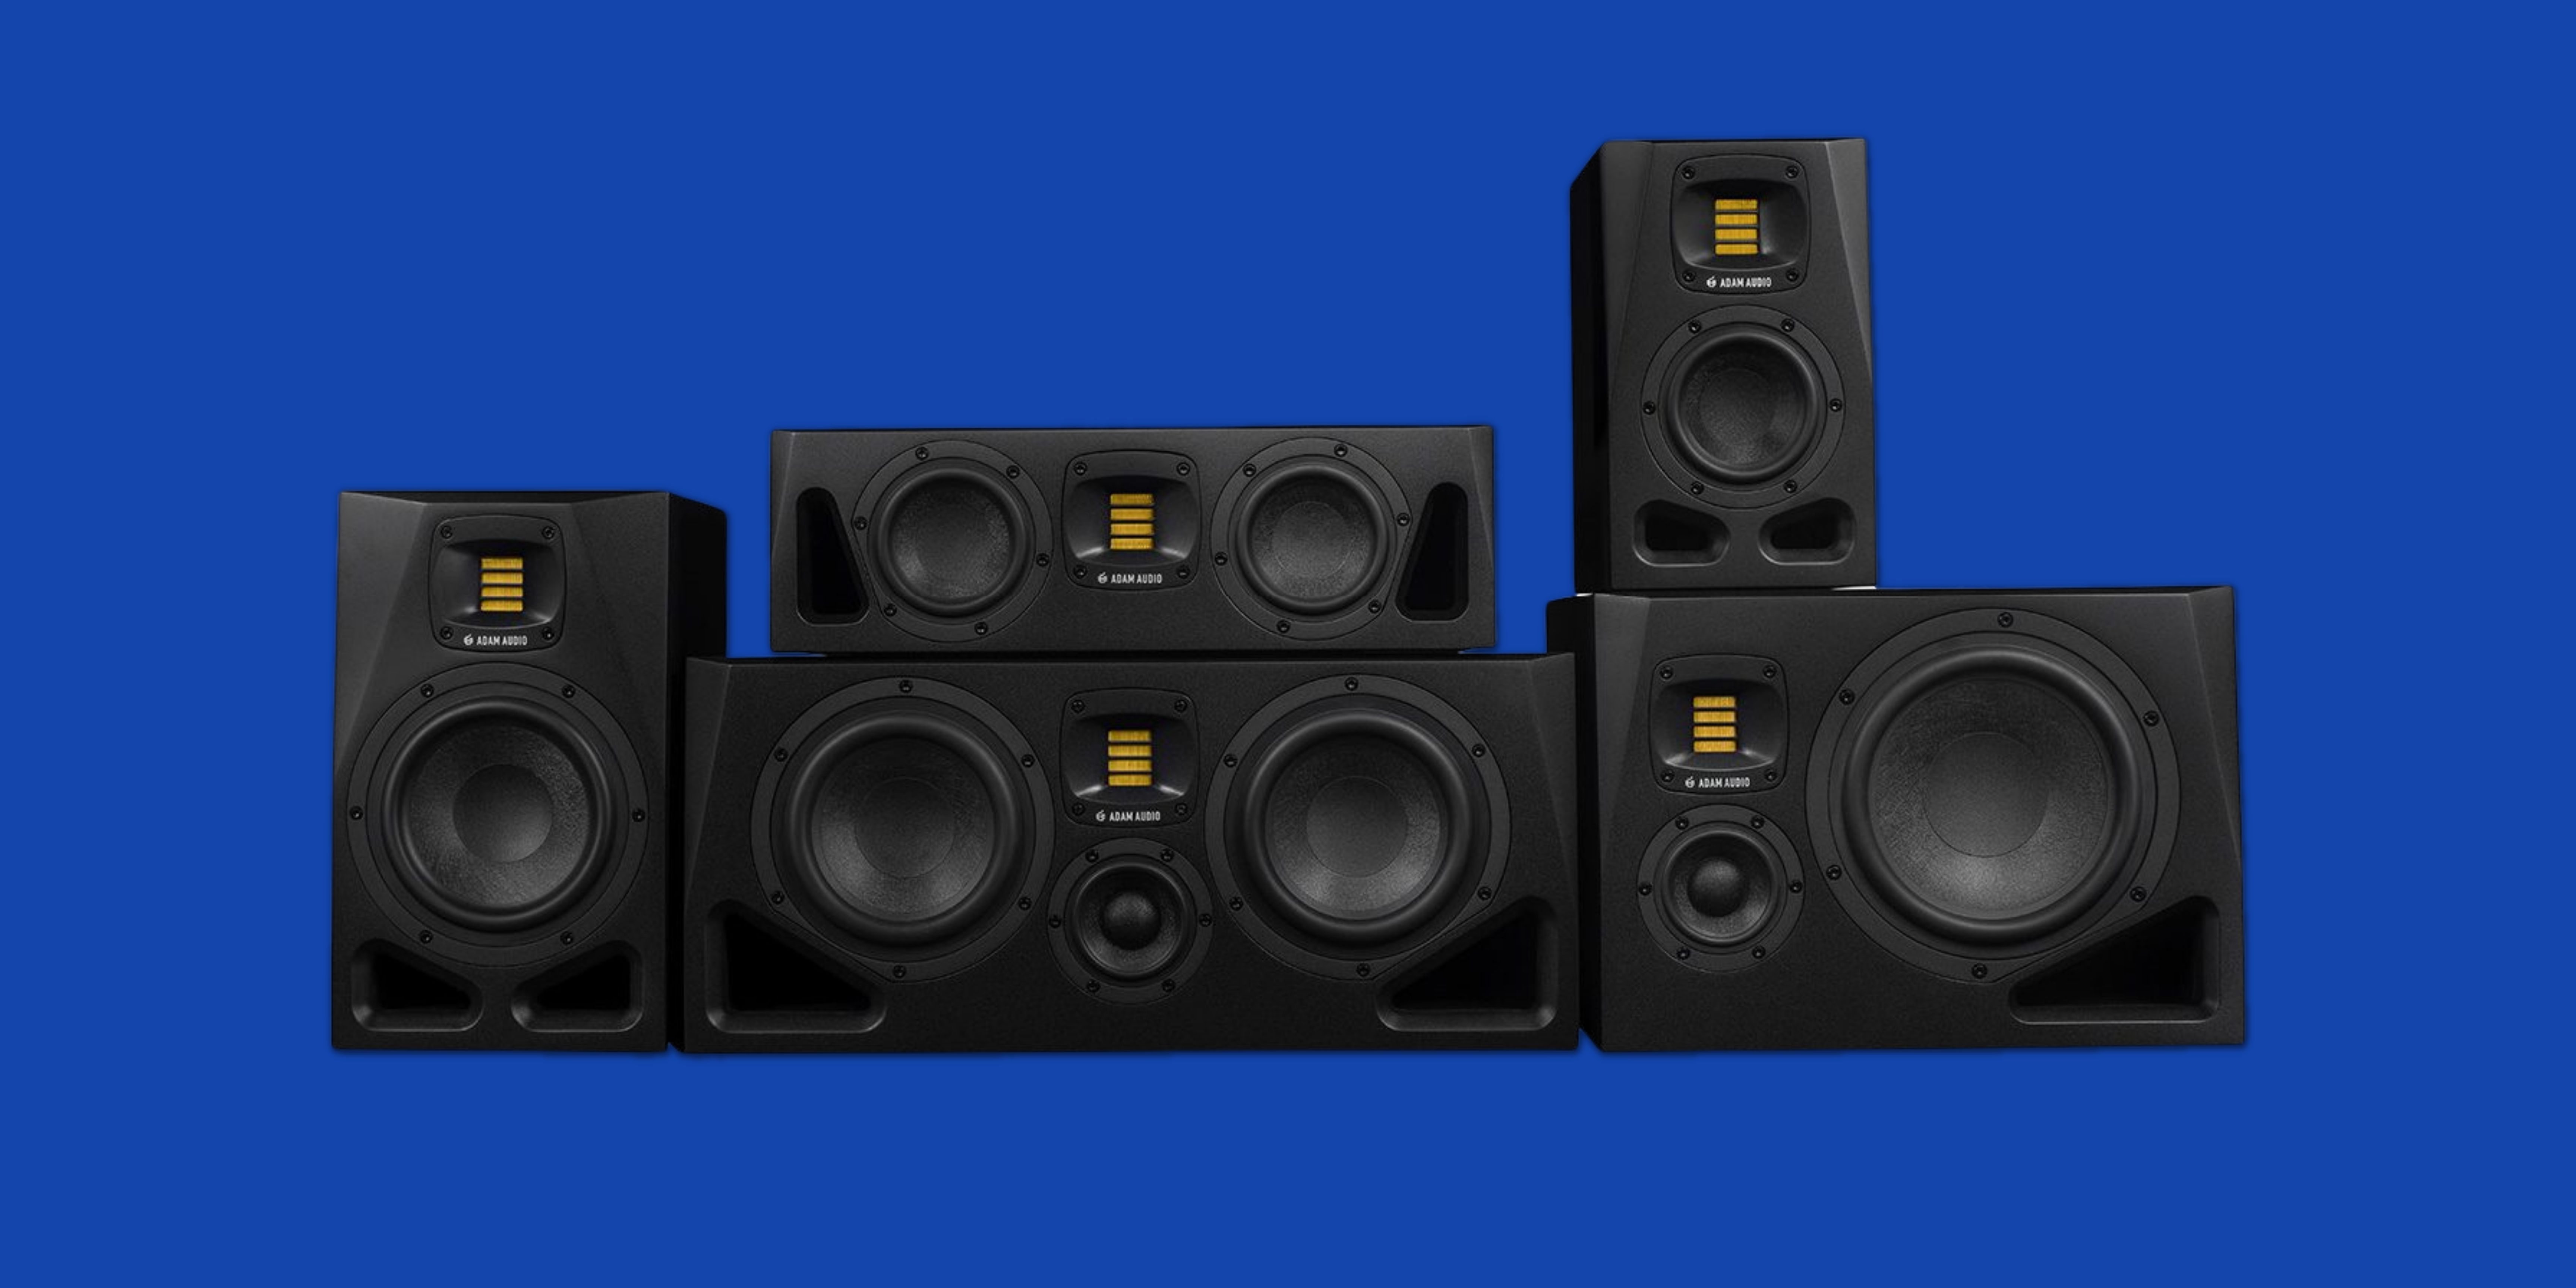 The A Series from Adam Audio